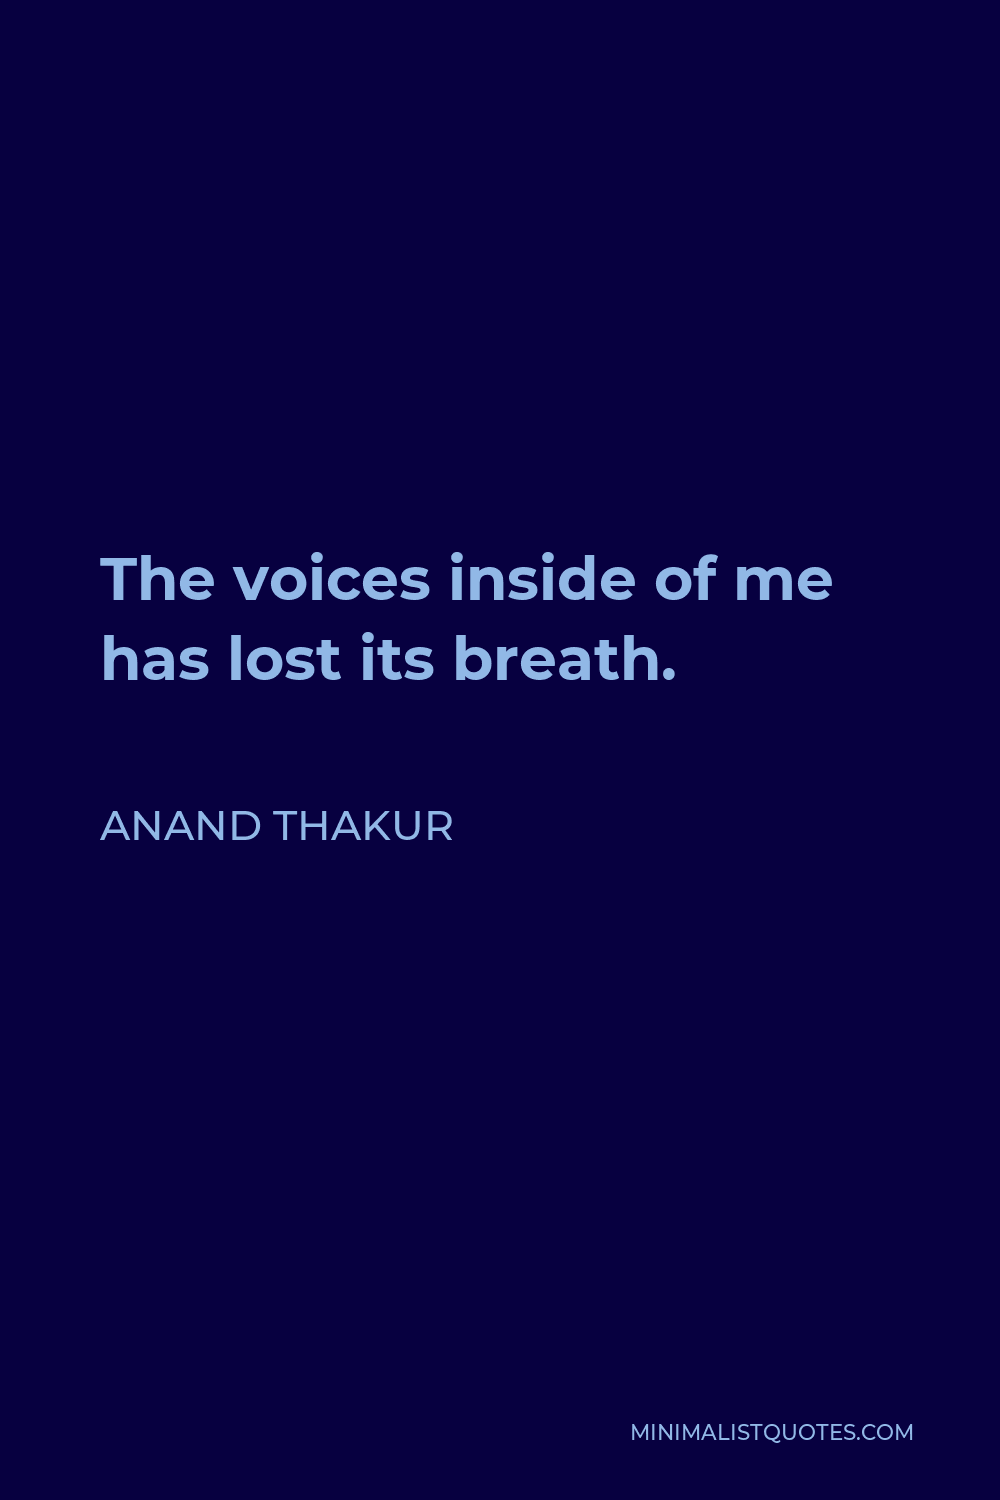 Anand Thakur Quote - The voices inside of me has lost its breath.